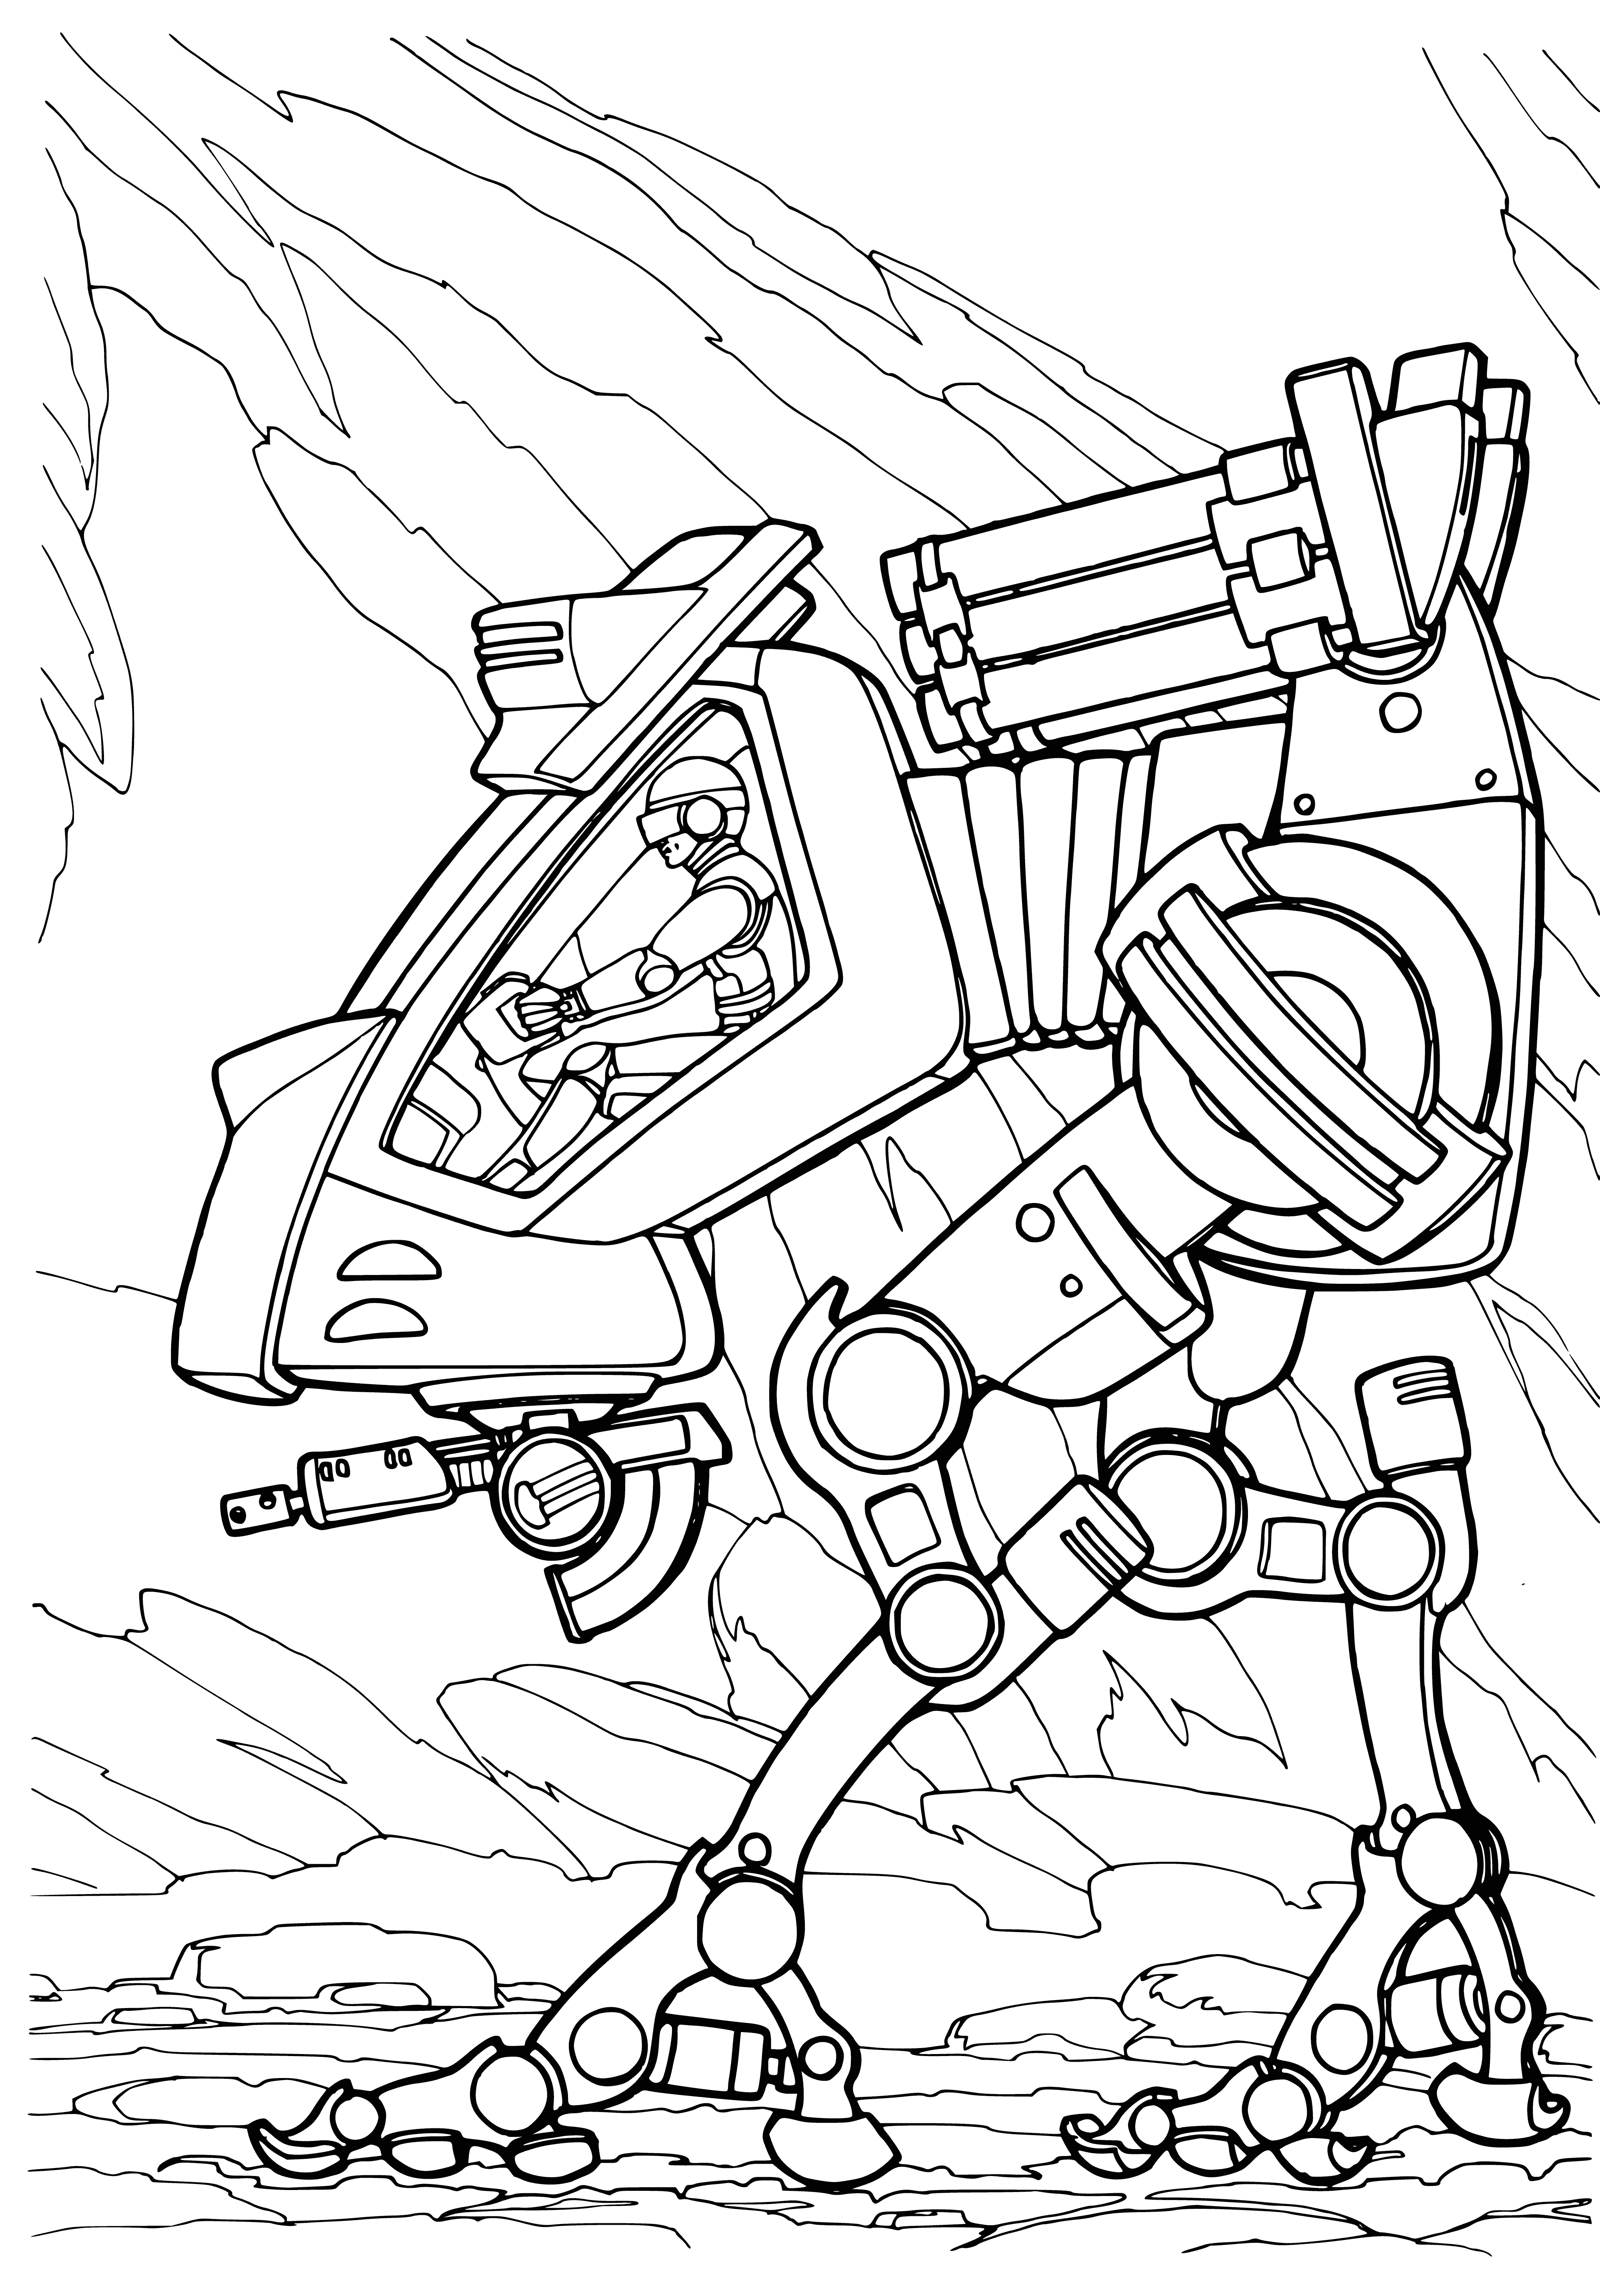 coloring page: Armored infantry lined up, equipped w/ advanced weaponry & armor, ready to take on any enemy. #FutureWars #ColoringPage